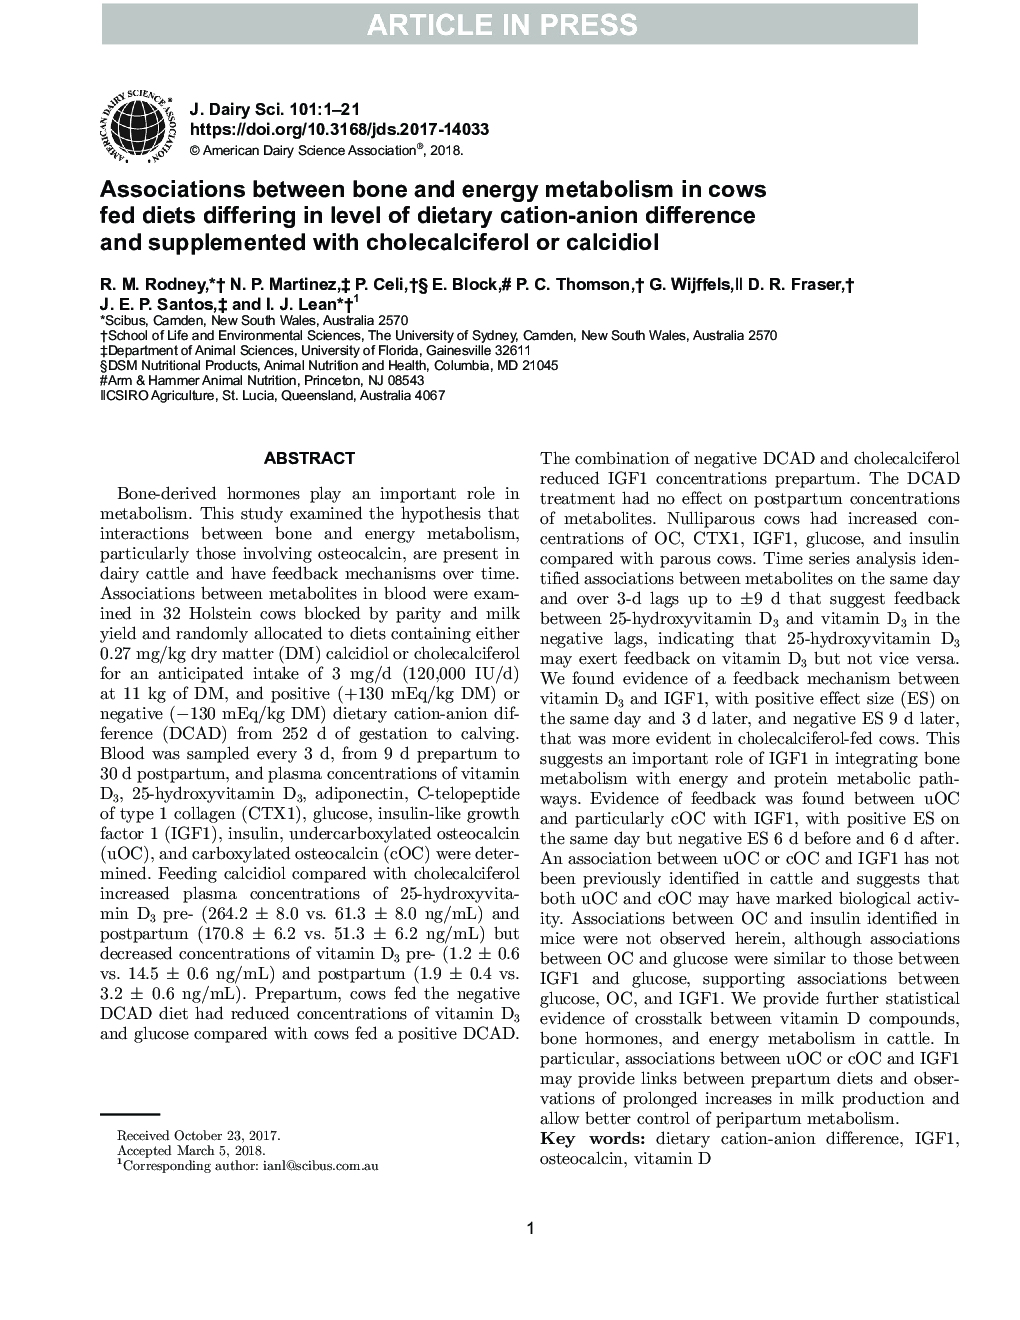 Associations between bone and energy metabolism in cows fed diets differing in level of dietary cation-anion difference and supplemented with cholecalciferol or calcidiol